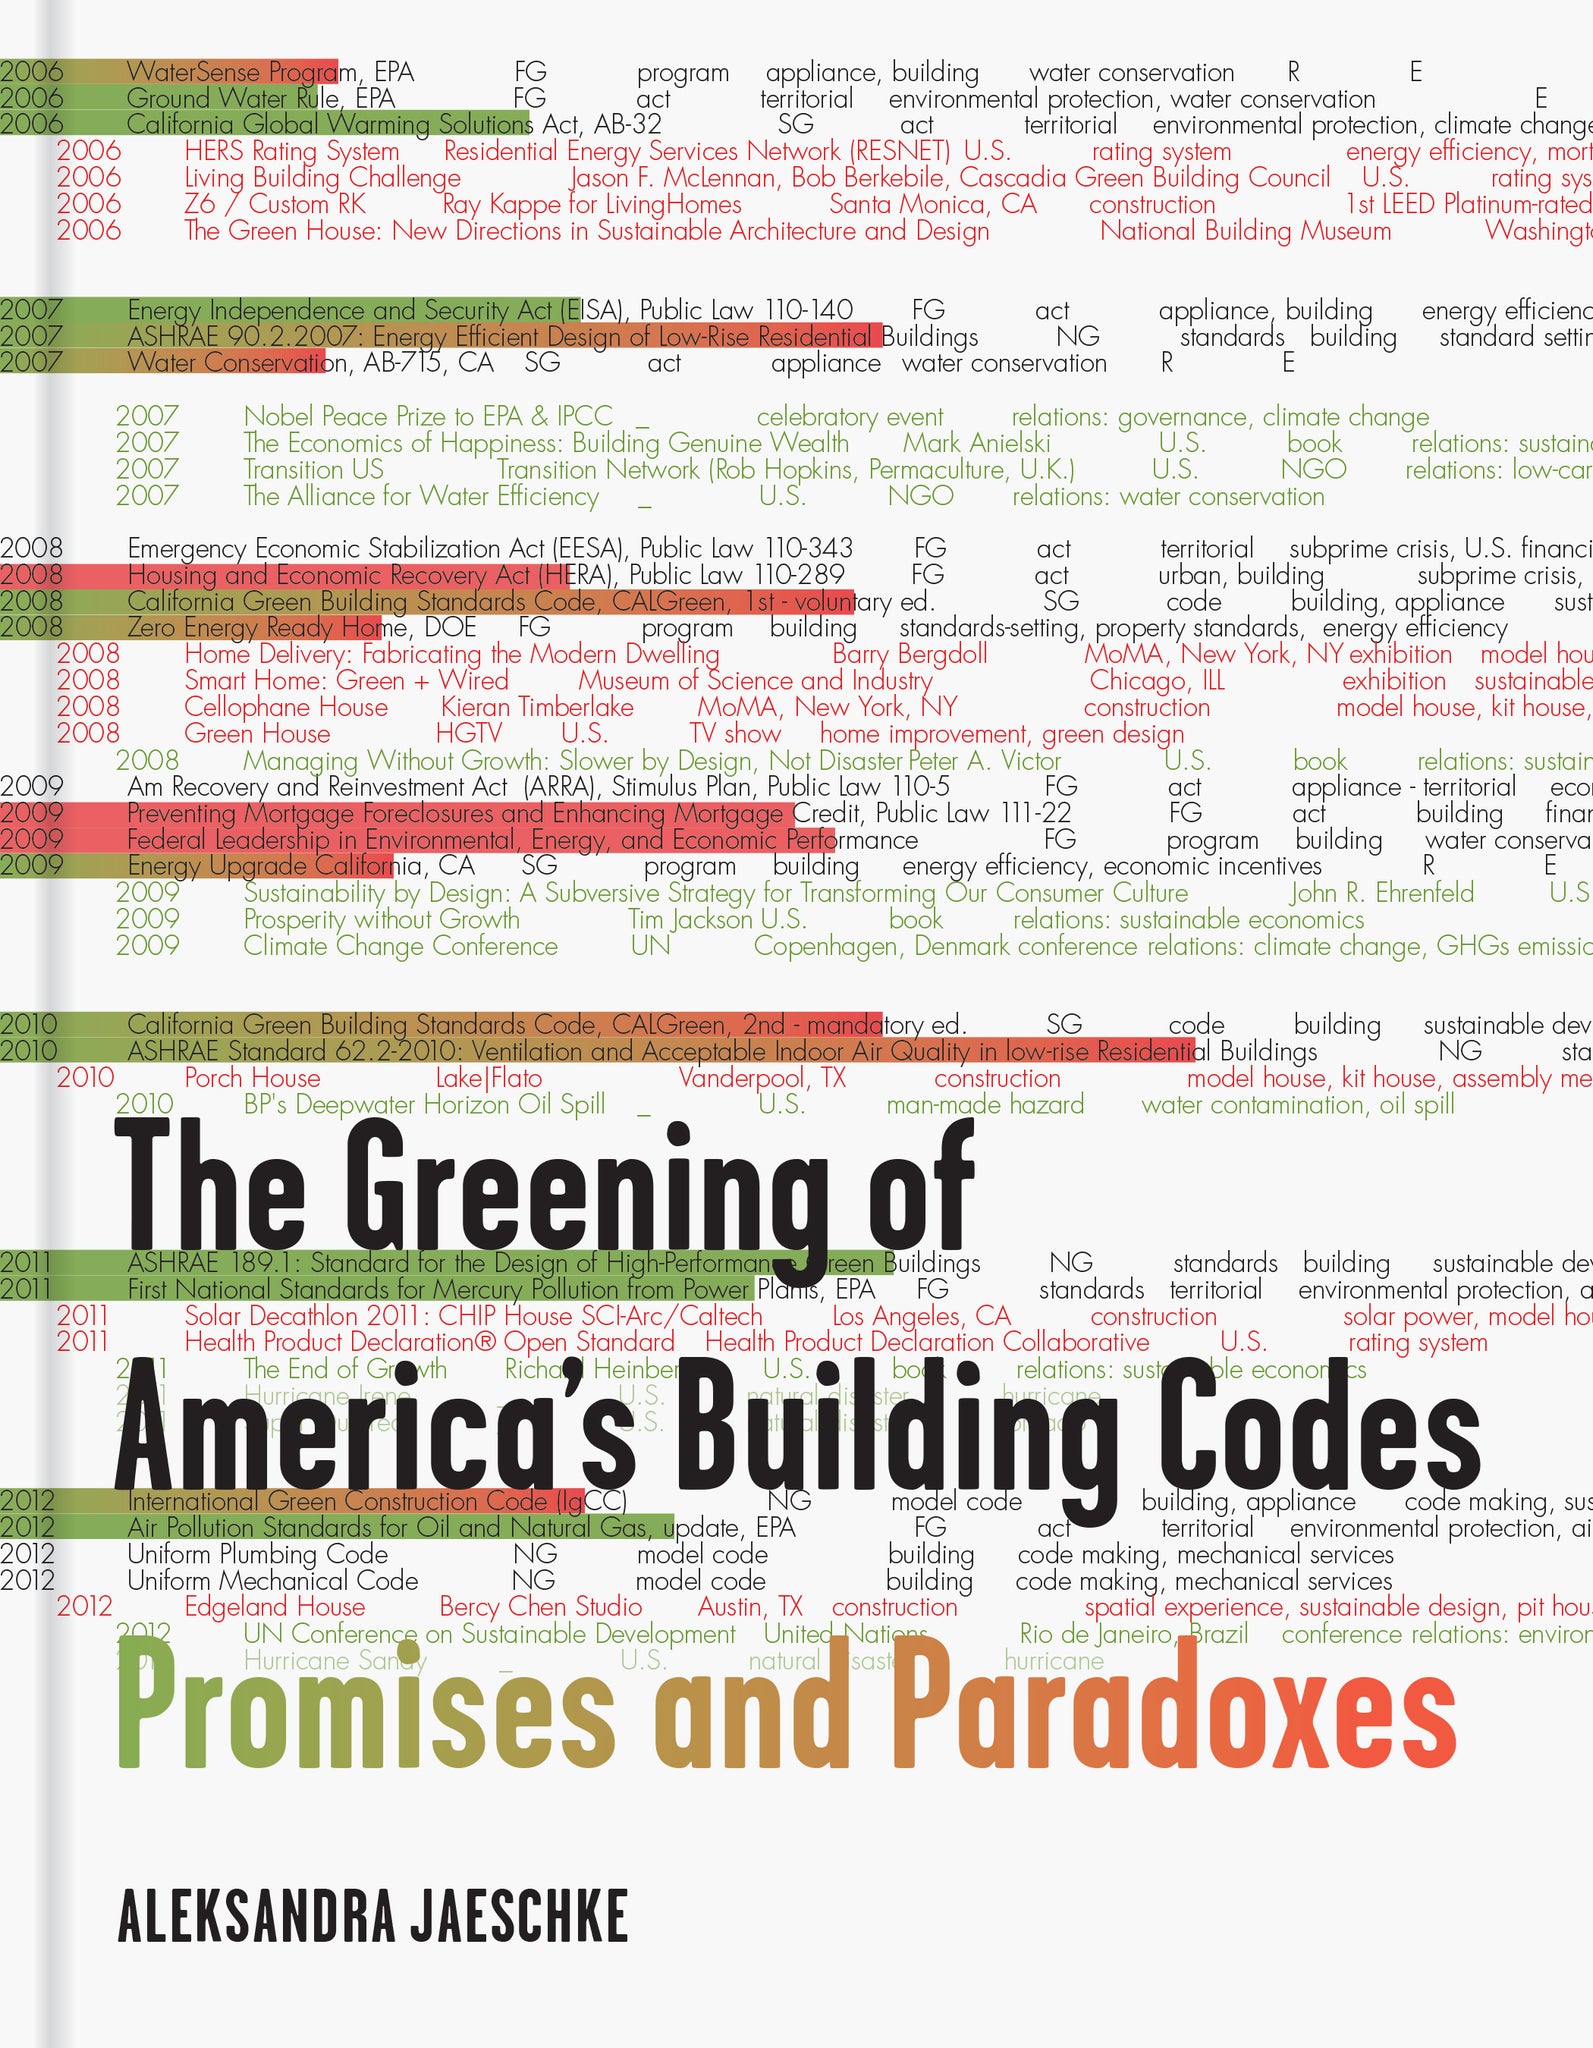 Greening of America’s Building Codes, the cover